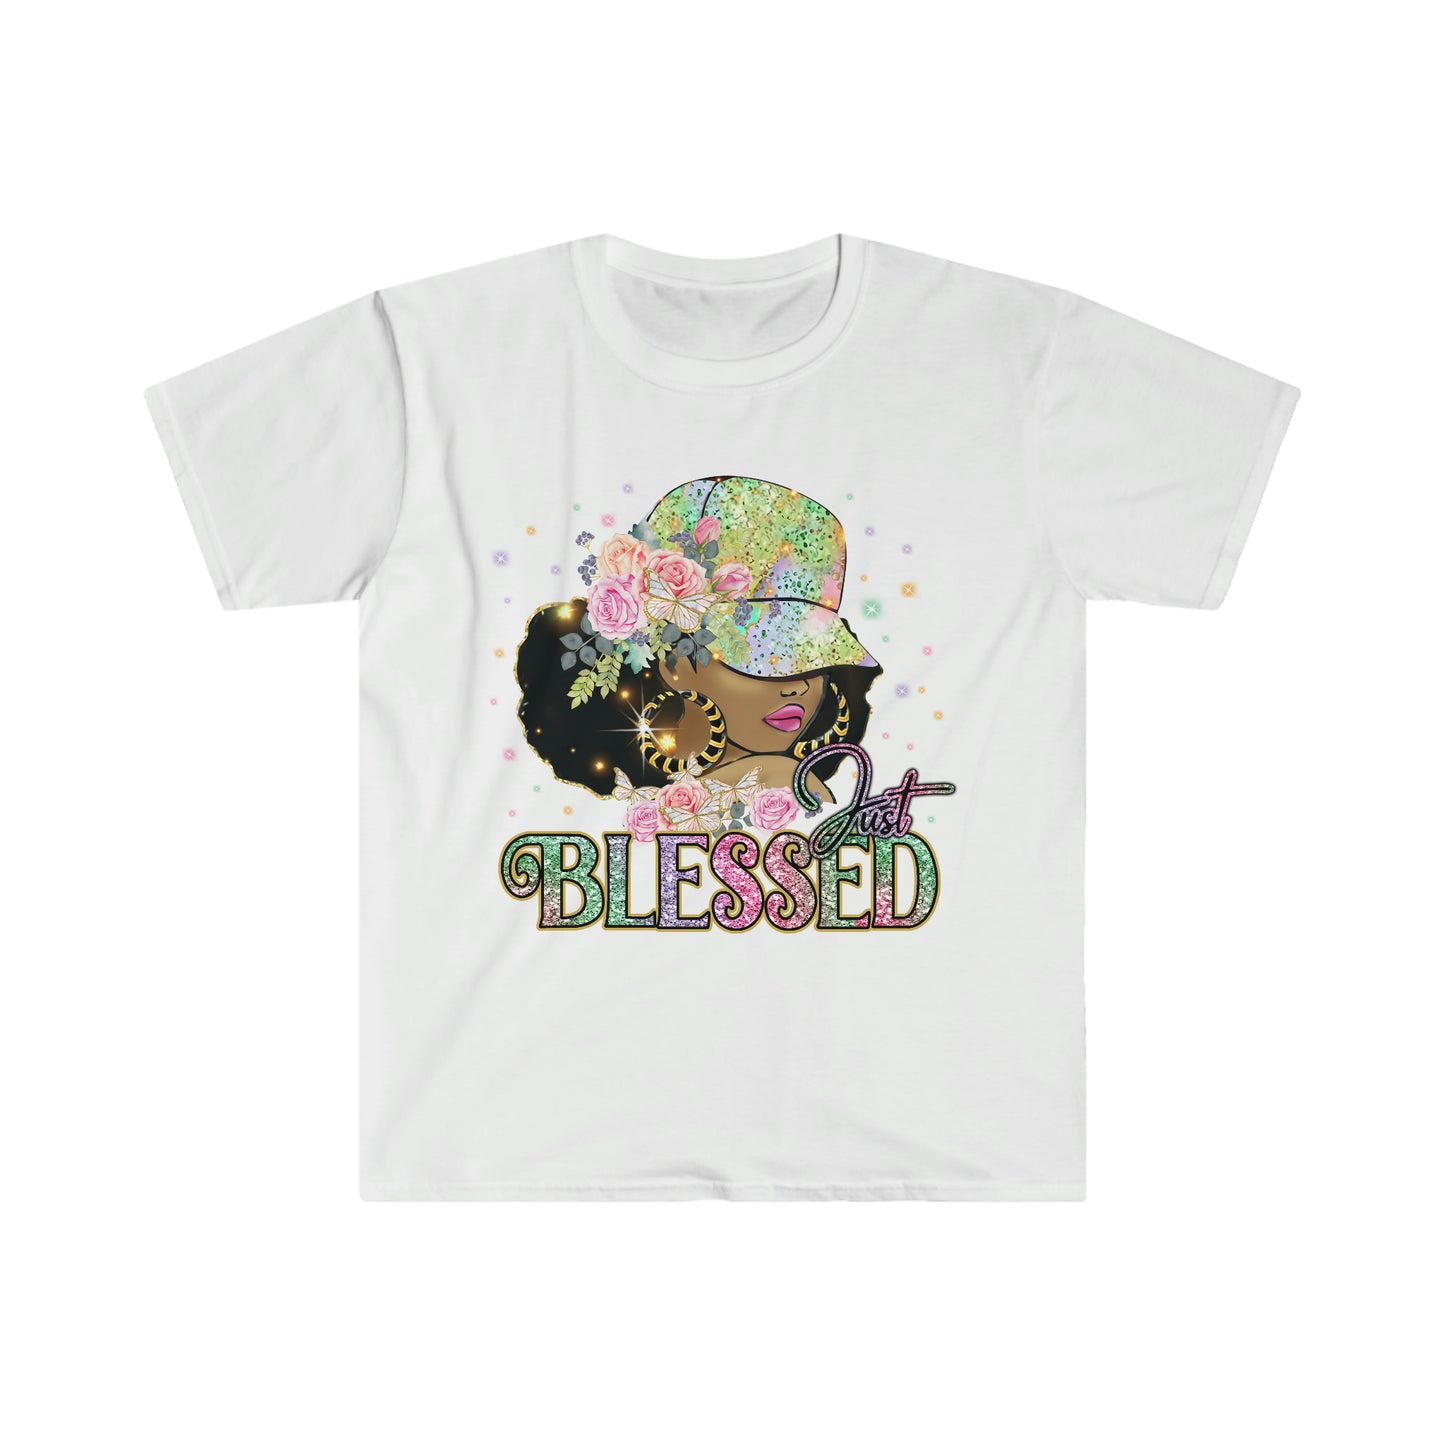 Just Blessed, Black Woman Christian Shirt